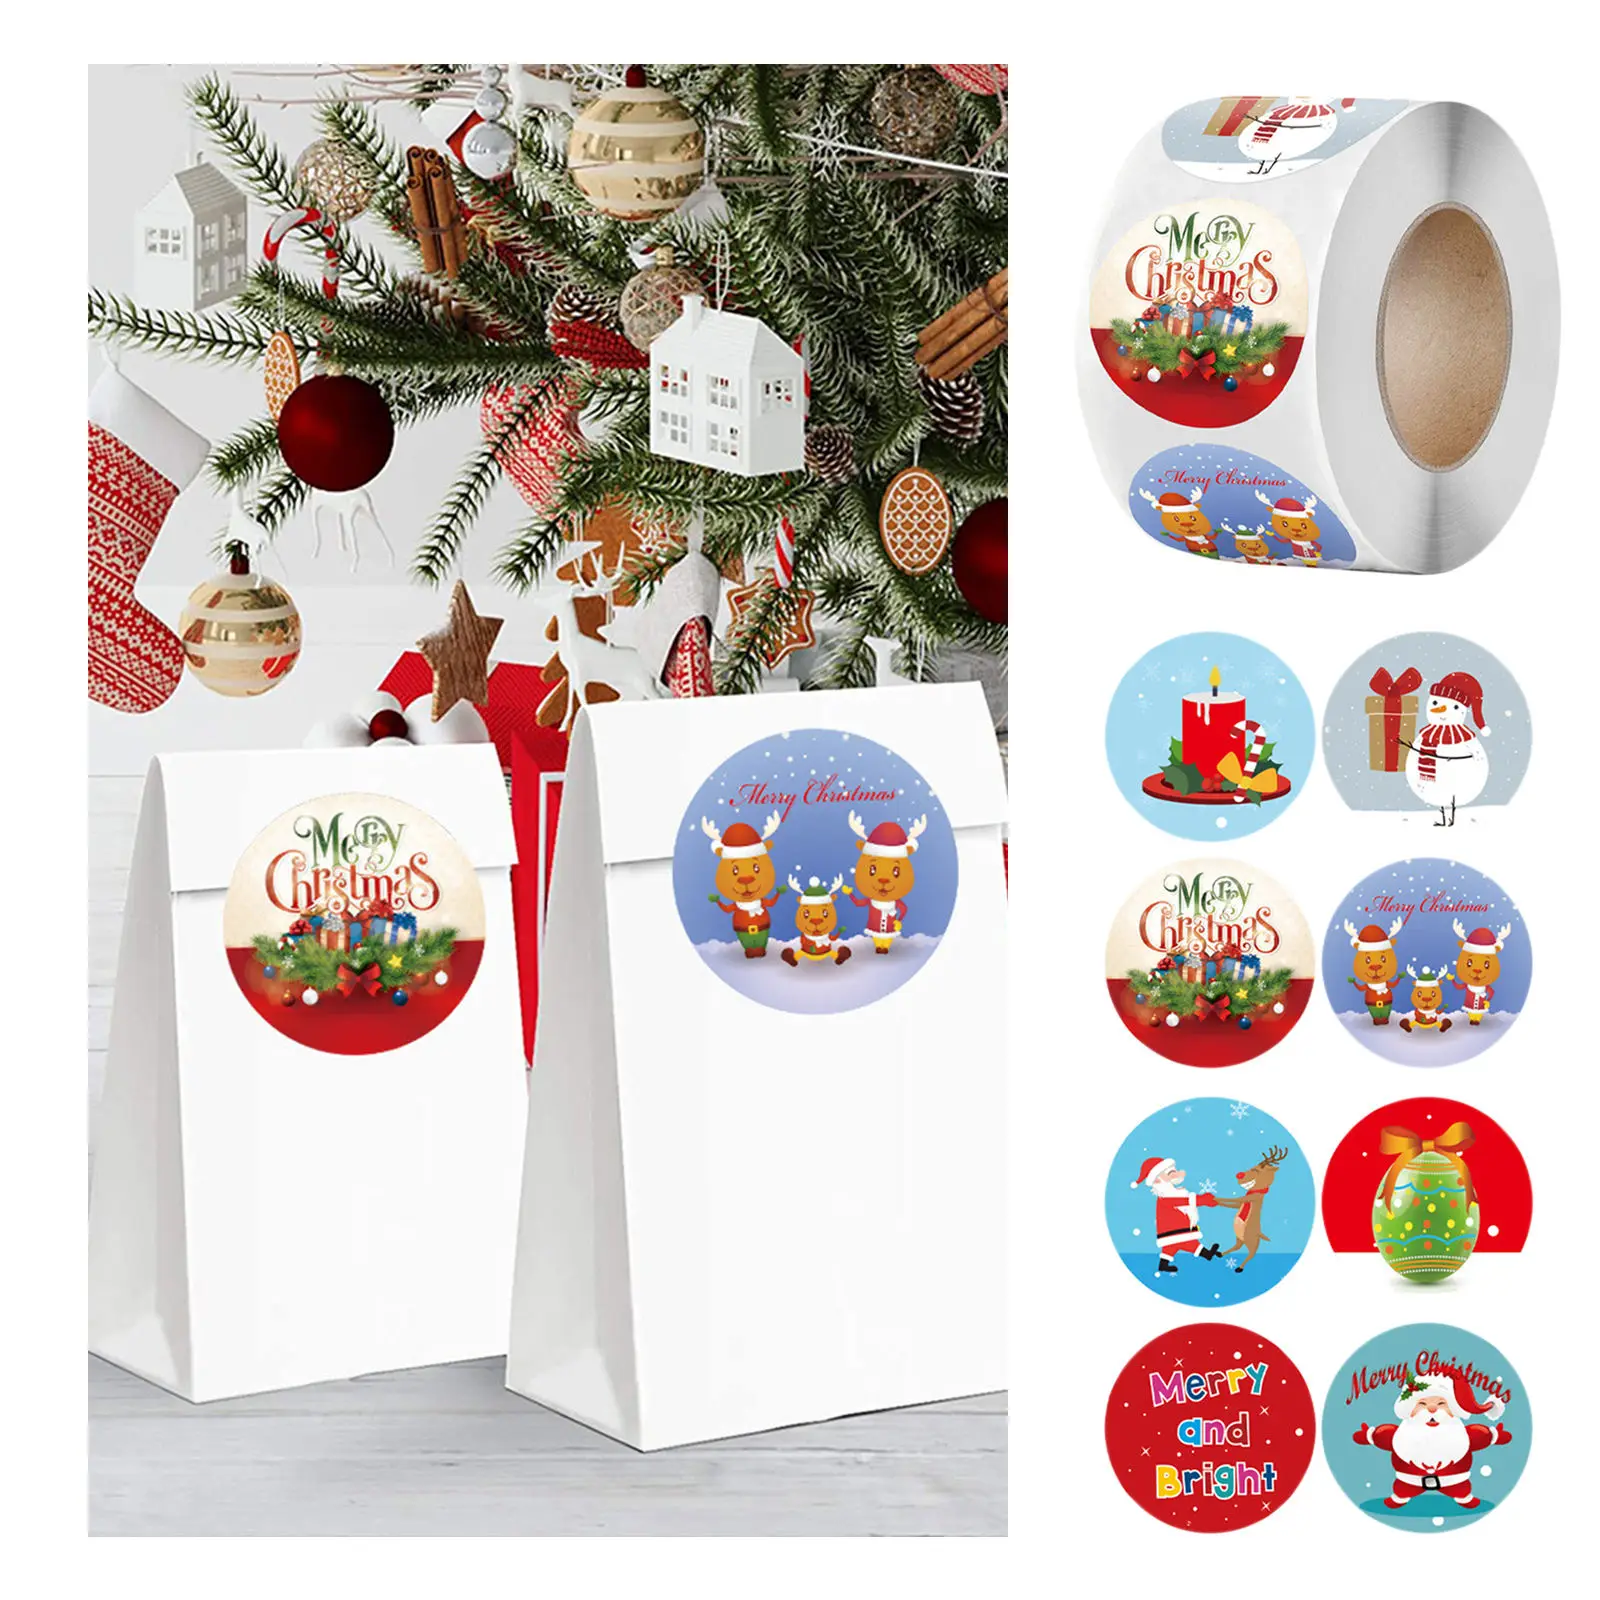 500 Pcs Merry Christmas Stickers Present Santa Adhesive Circle Candy 1 Roll for Box